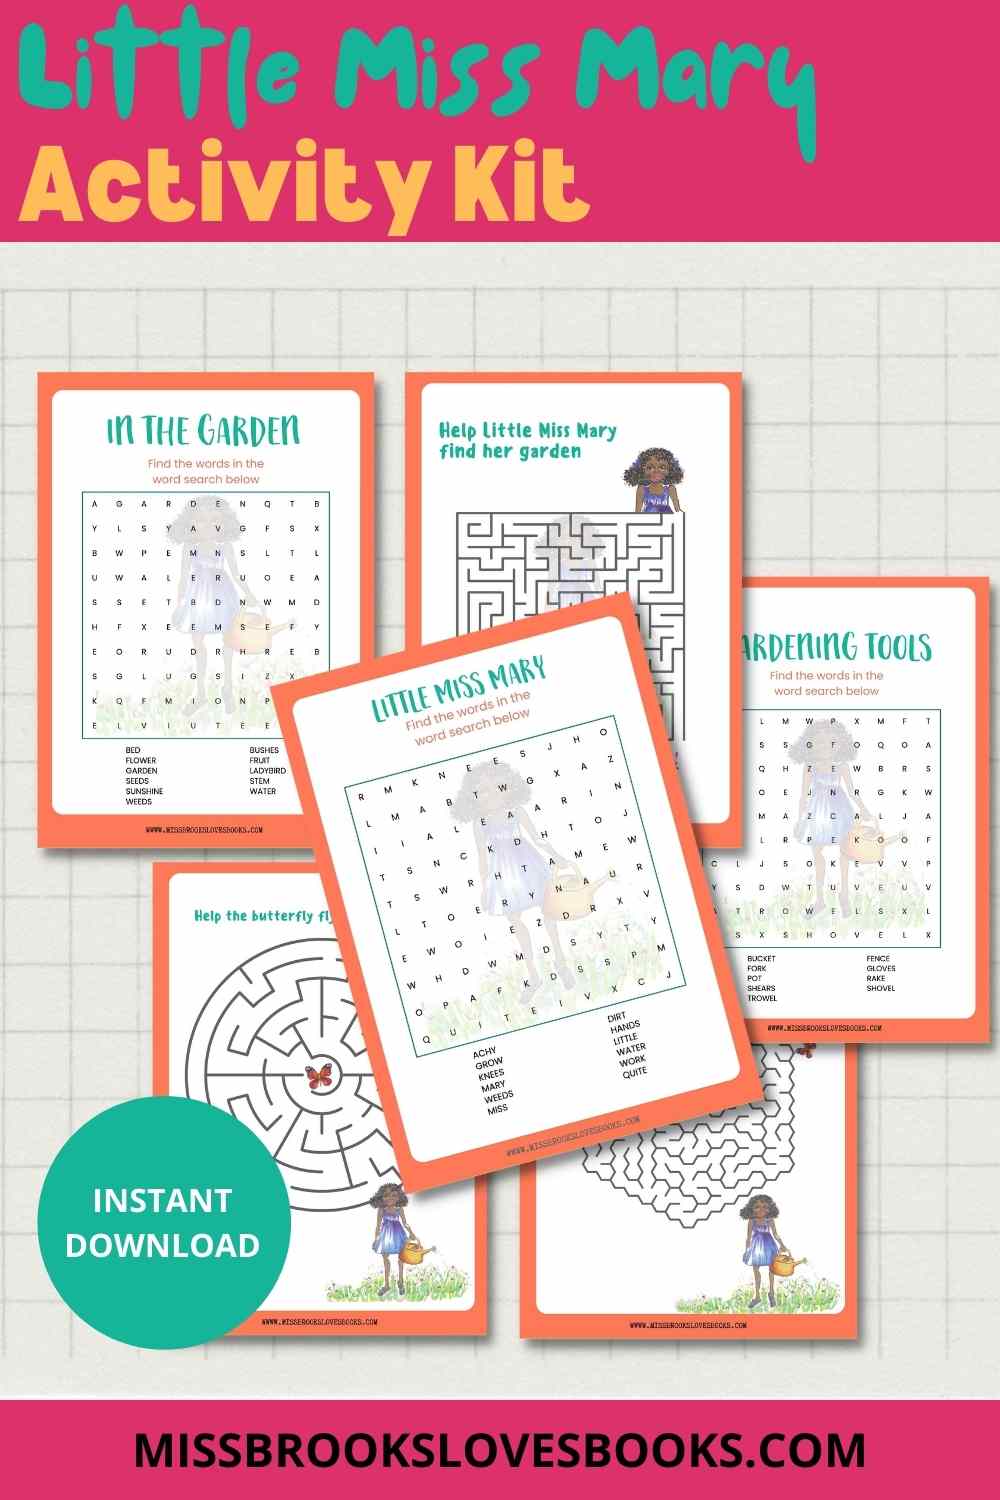 Little Miss Mary - Printable Activity Kit | African-Caribbean | African-American Girl - Miss Brooks Loves Books